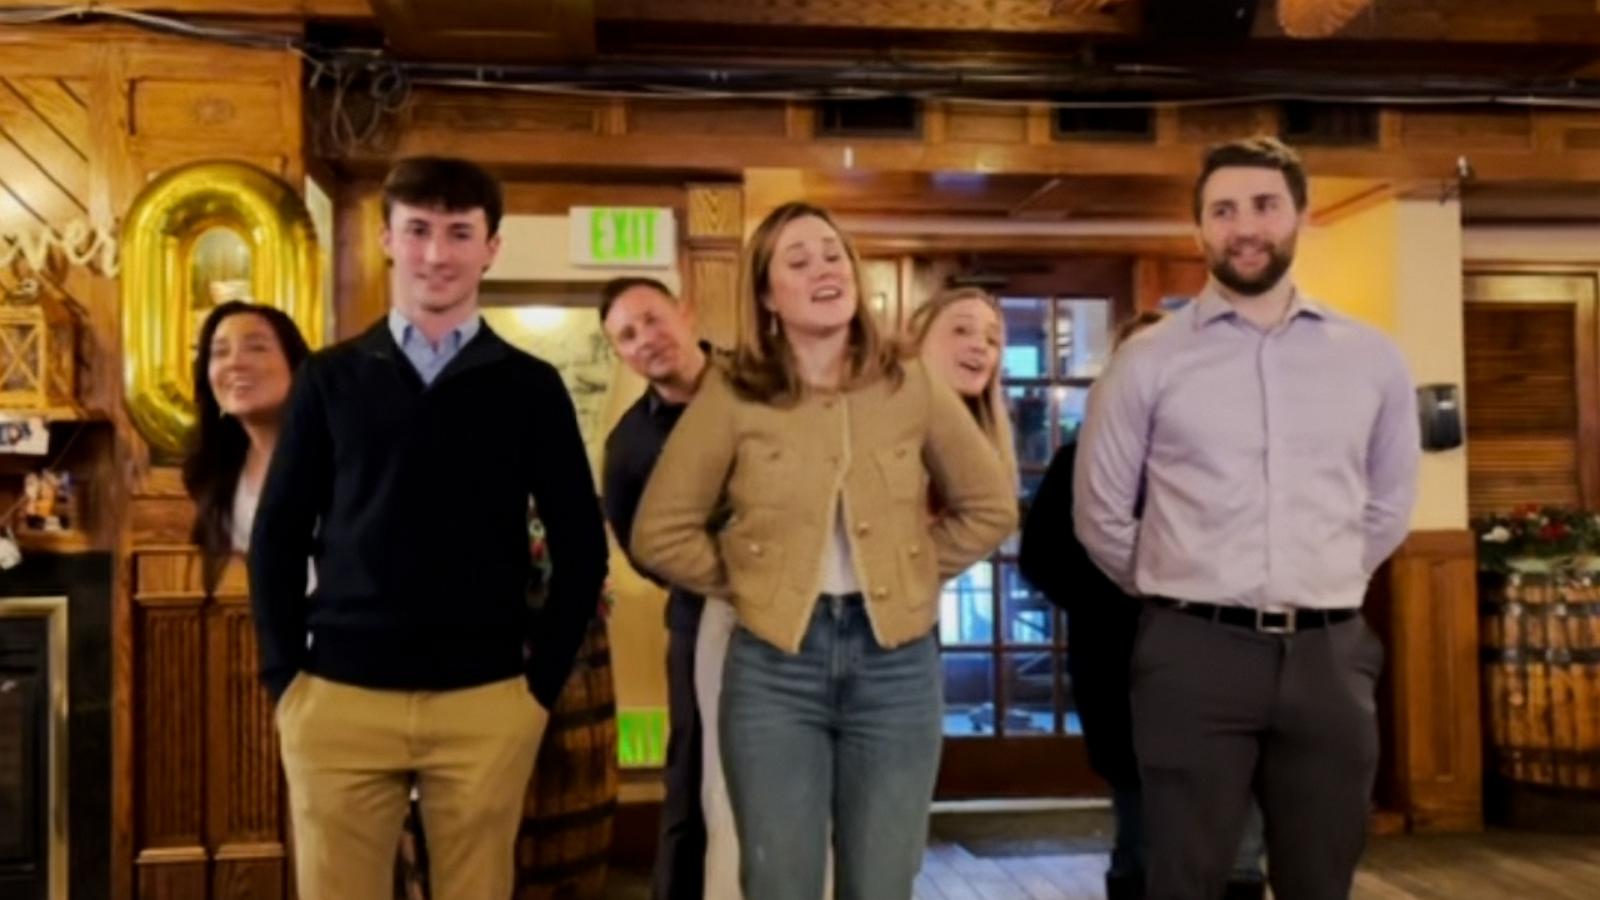 VIDEO: Watch these 6 siblings serenade their mom with 'So Long, Farewell' for her birthday